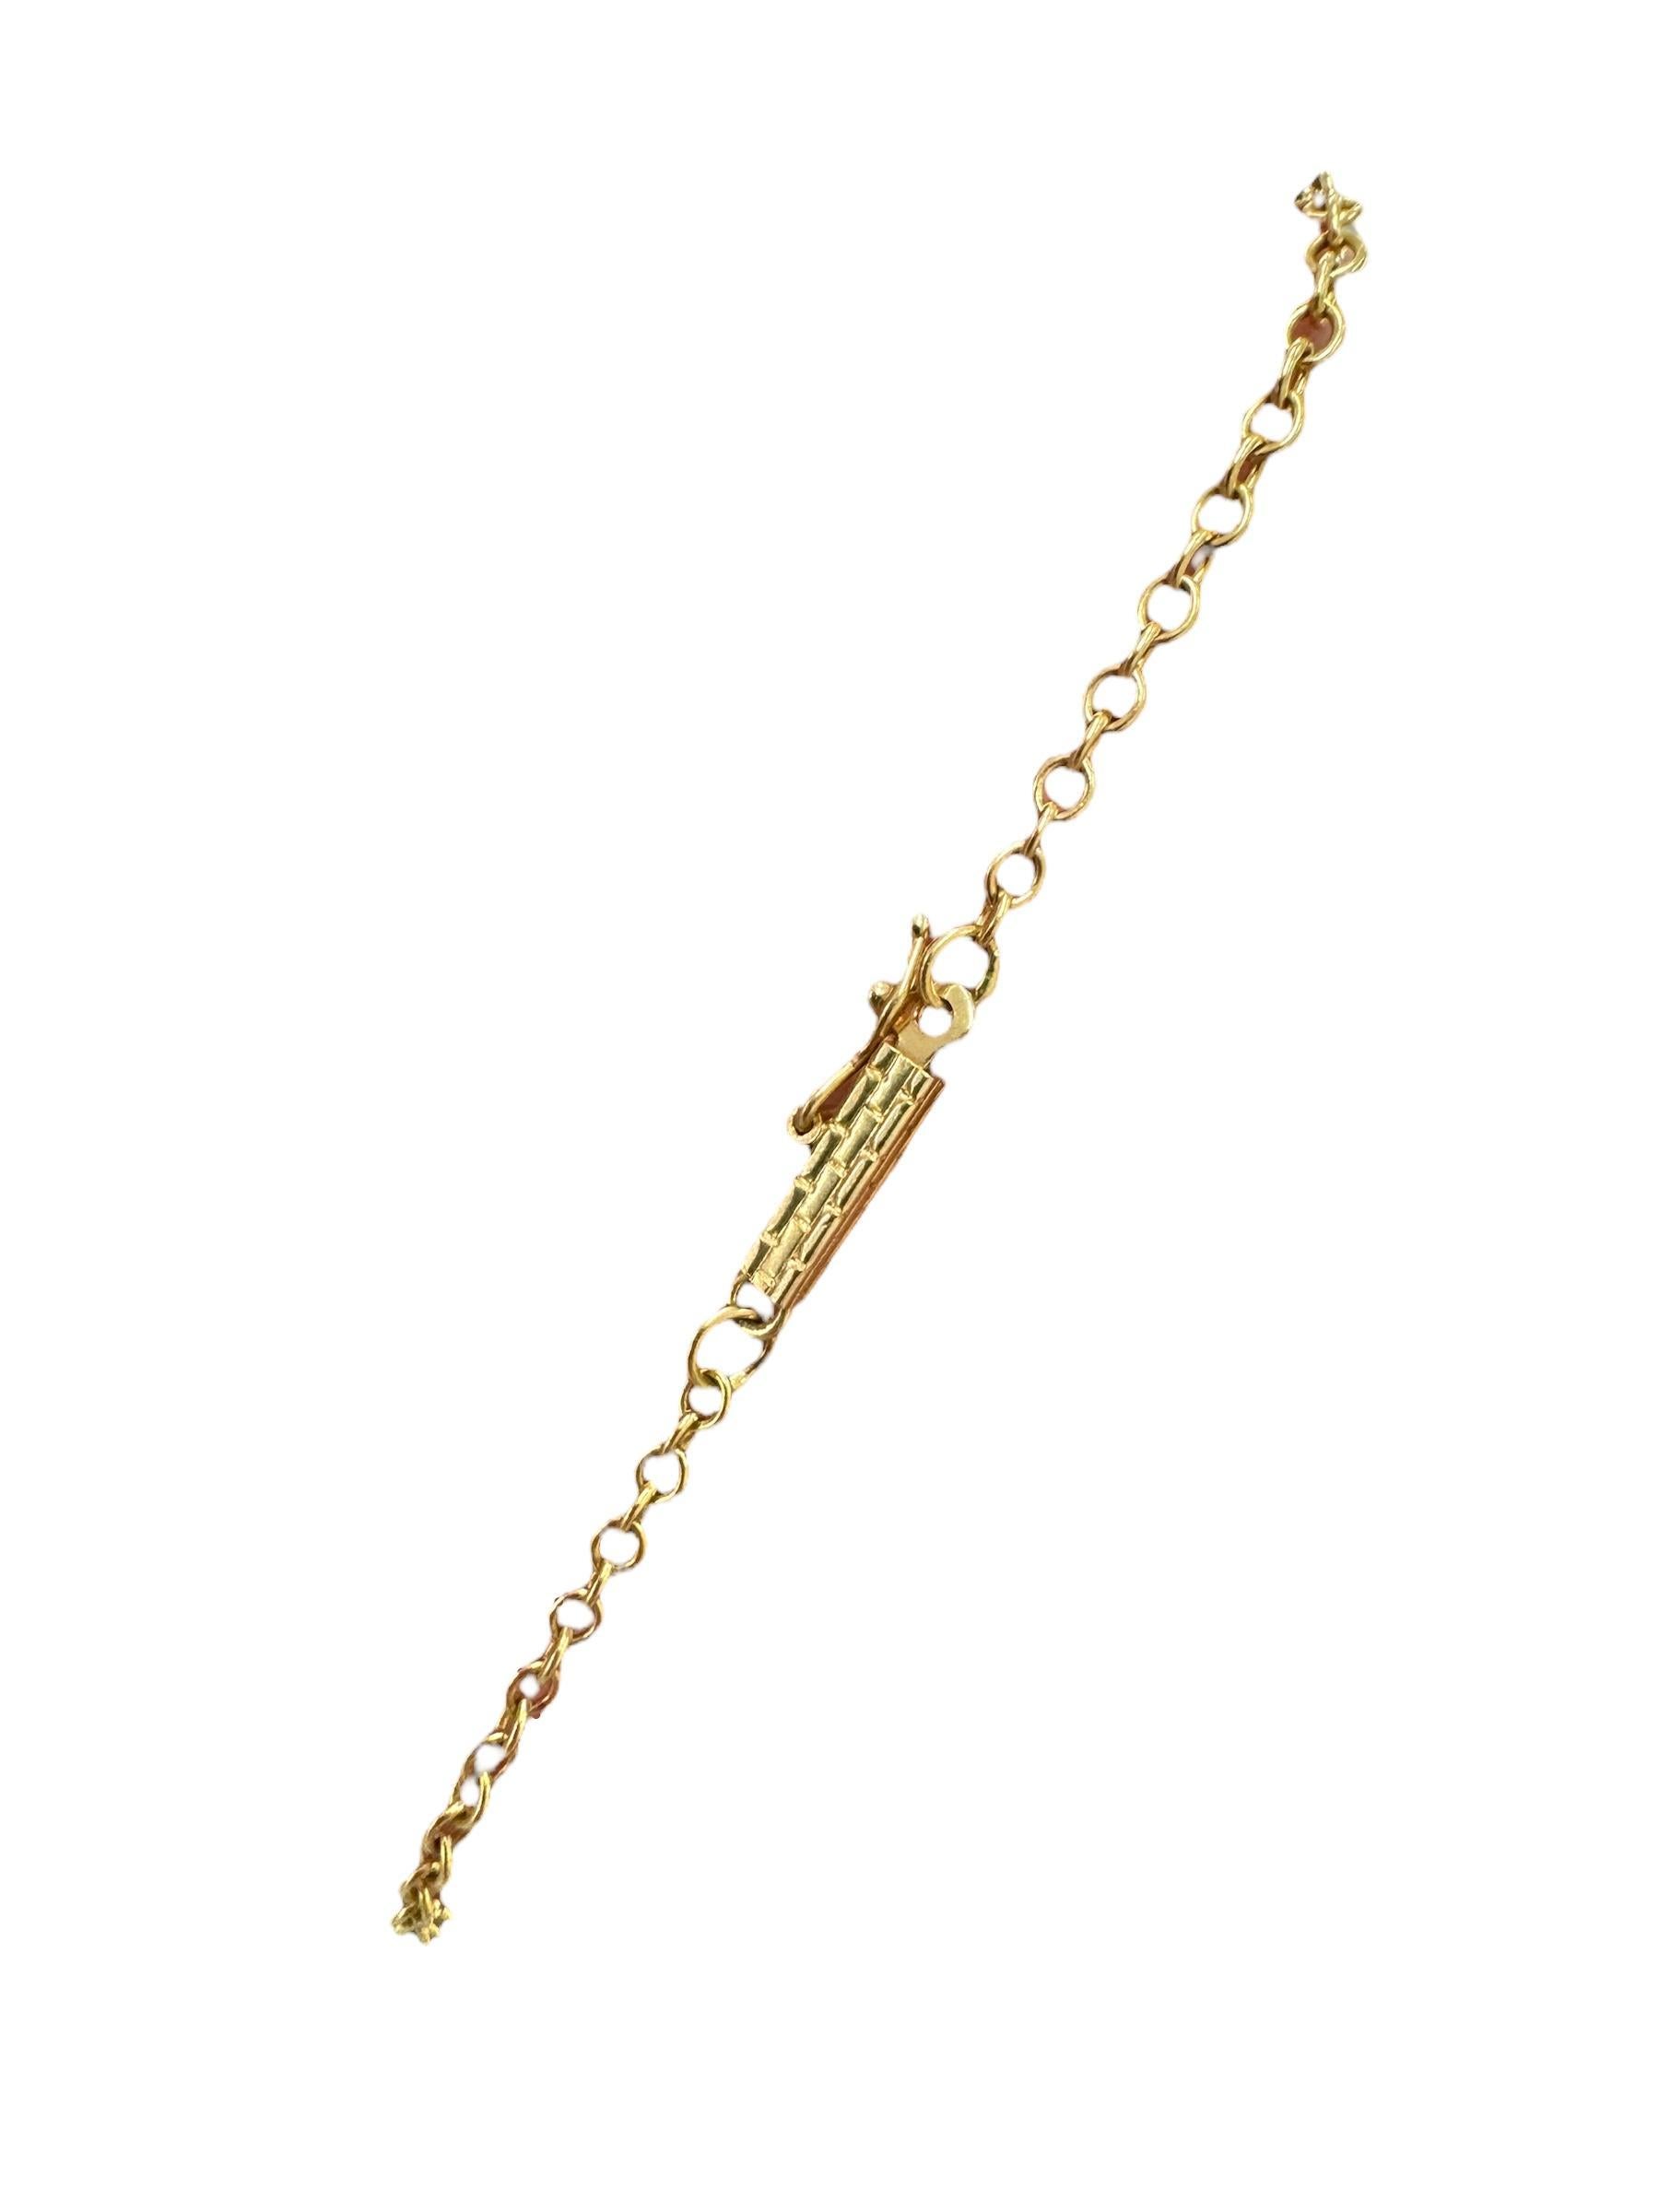 Contemporary Estate 14K Yellow Gold Feather Necklace 24 Inches 1